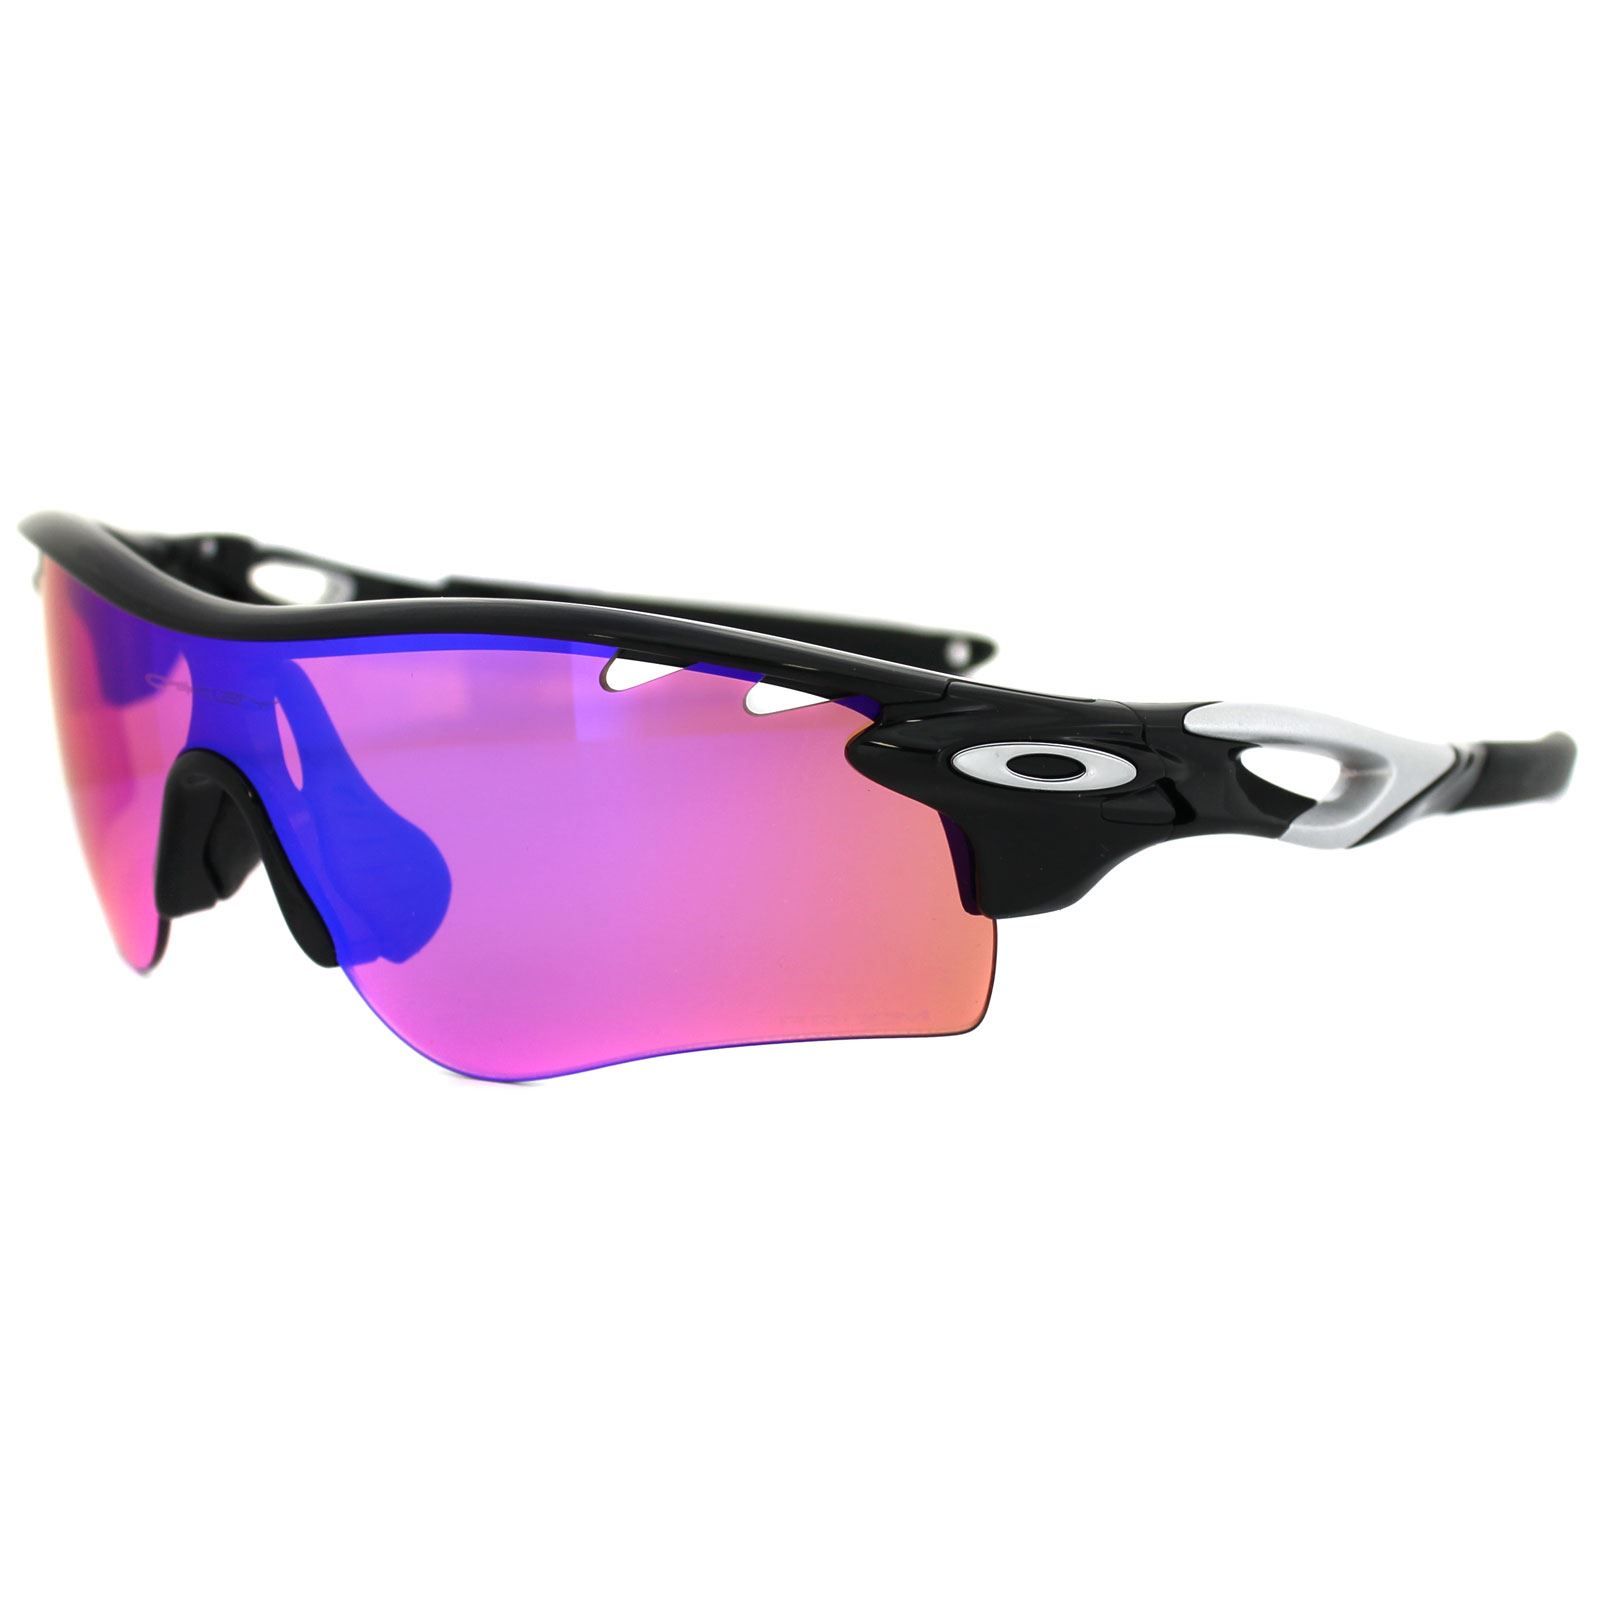 Oakley Sunglasses Radarlock Path OO9181-41 Polished Black Prizm Trail & Clear Vented Replacement The superb peripheral views given by the original Radar range has been enhanced with the addition of Switchlock technology giving you the chance to change lenses in an instant for the different light conditions in whatever sport or activity you take on. The lightweight and durable O-Matter frame has surge ports to give a cooling flow of air and interchangeable notepads give a customised fit. An Oakley Soft Vault case is included as well as a set of spare lenses so you have bright and low light lens options.